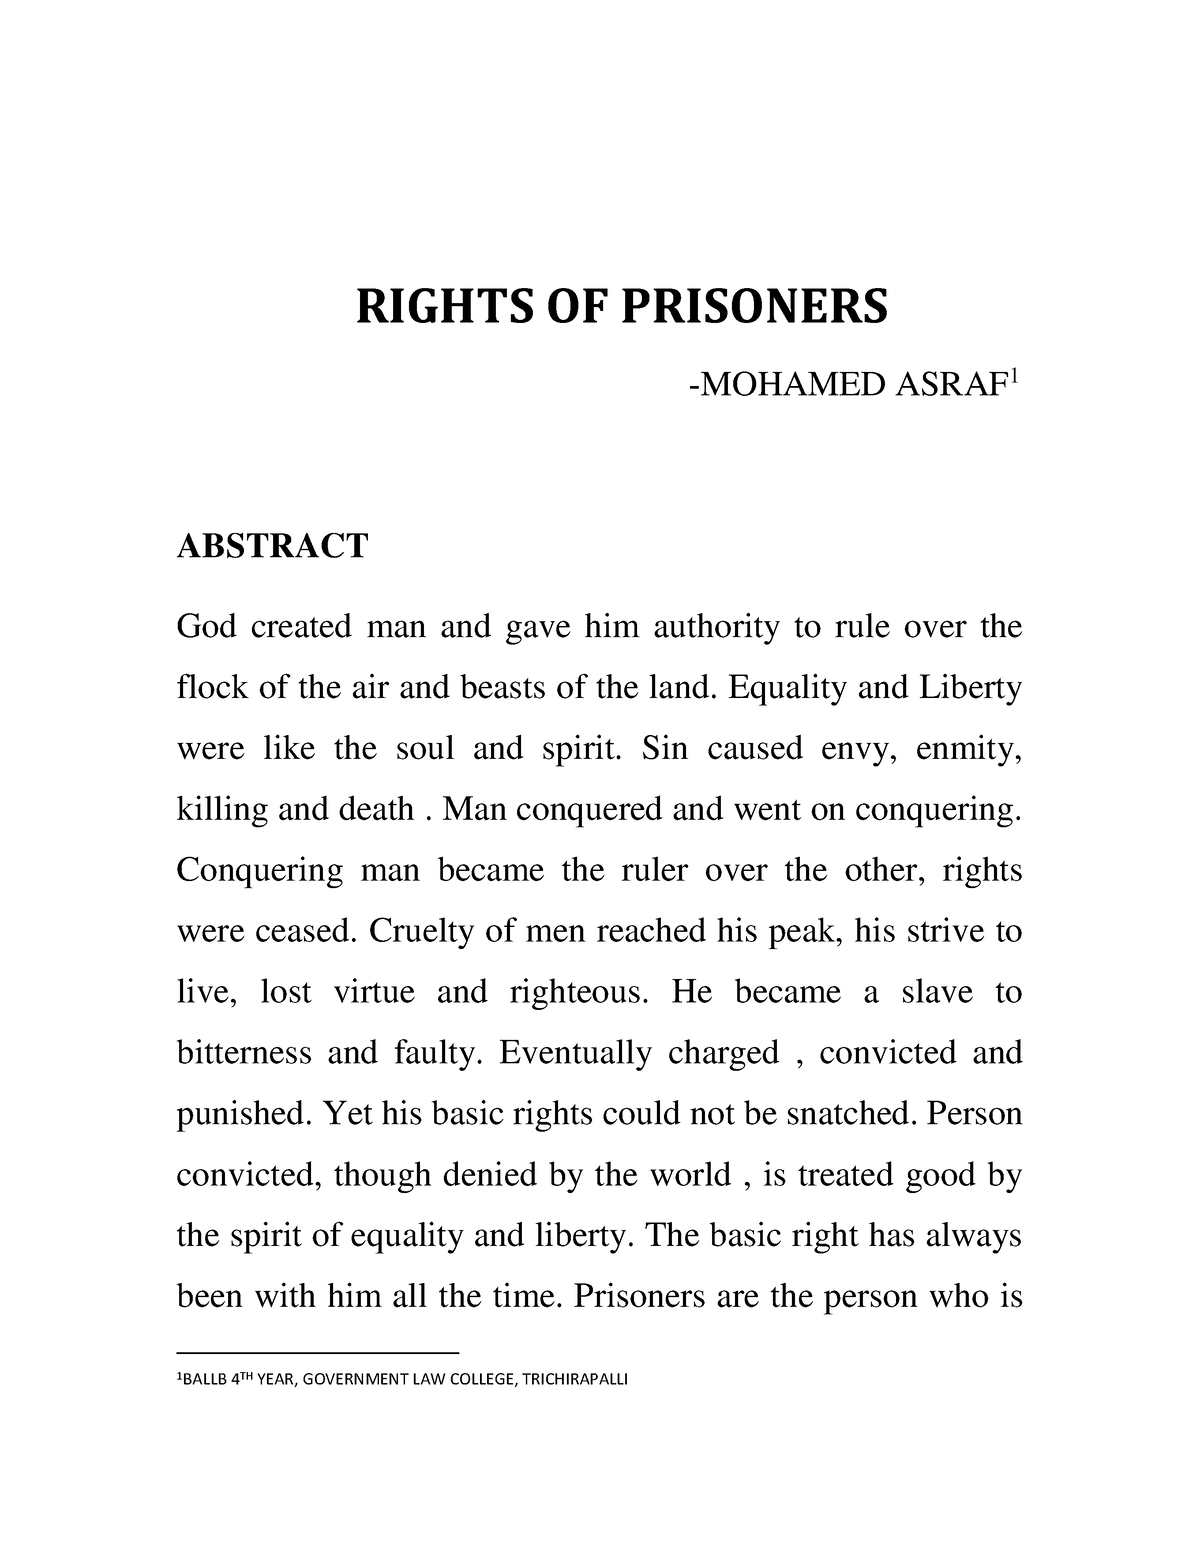 dissertation on human rights of prisoners